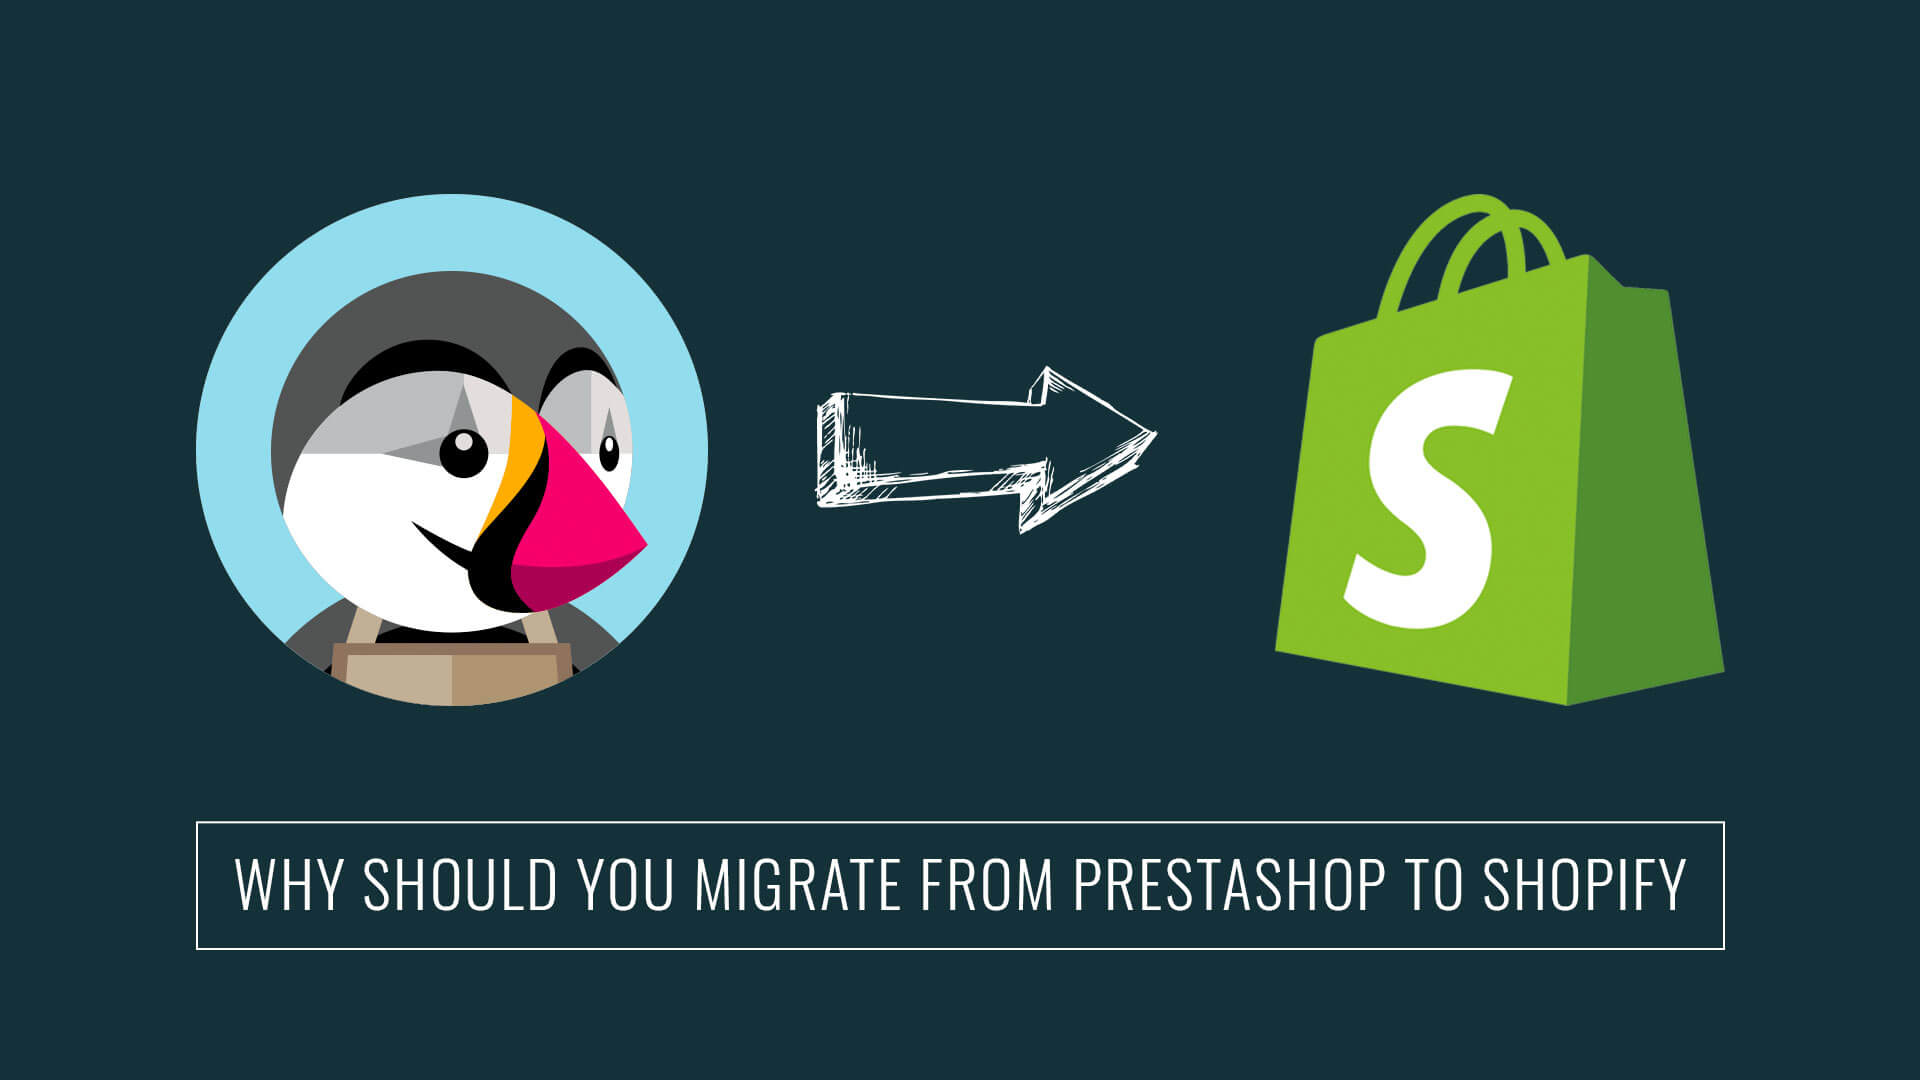 Why Should You Migrate from PrestaShop to Shopify